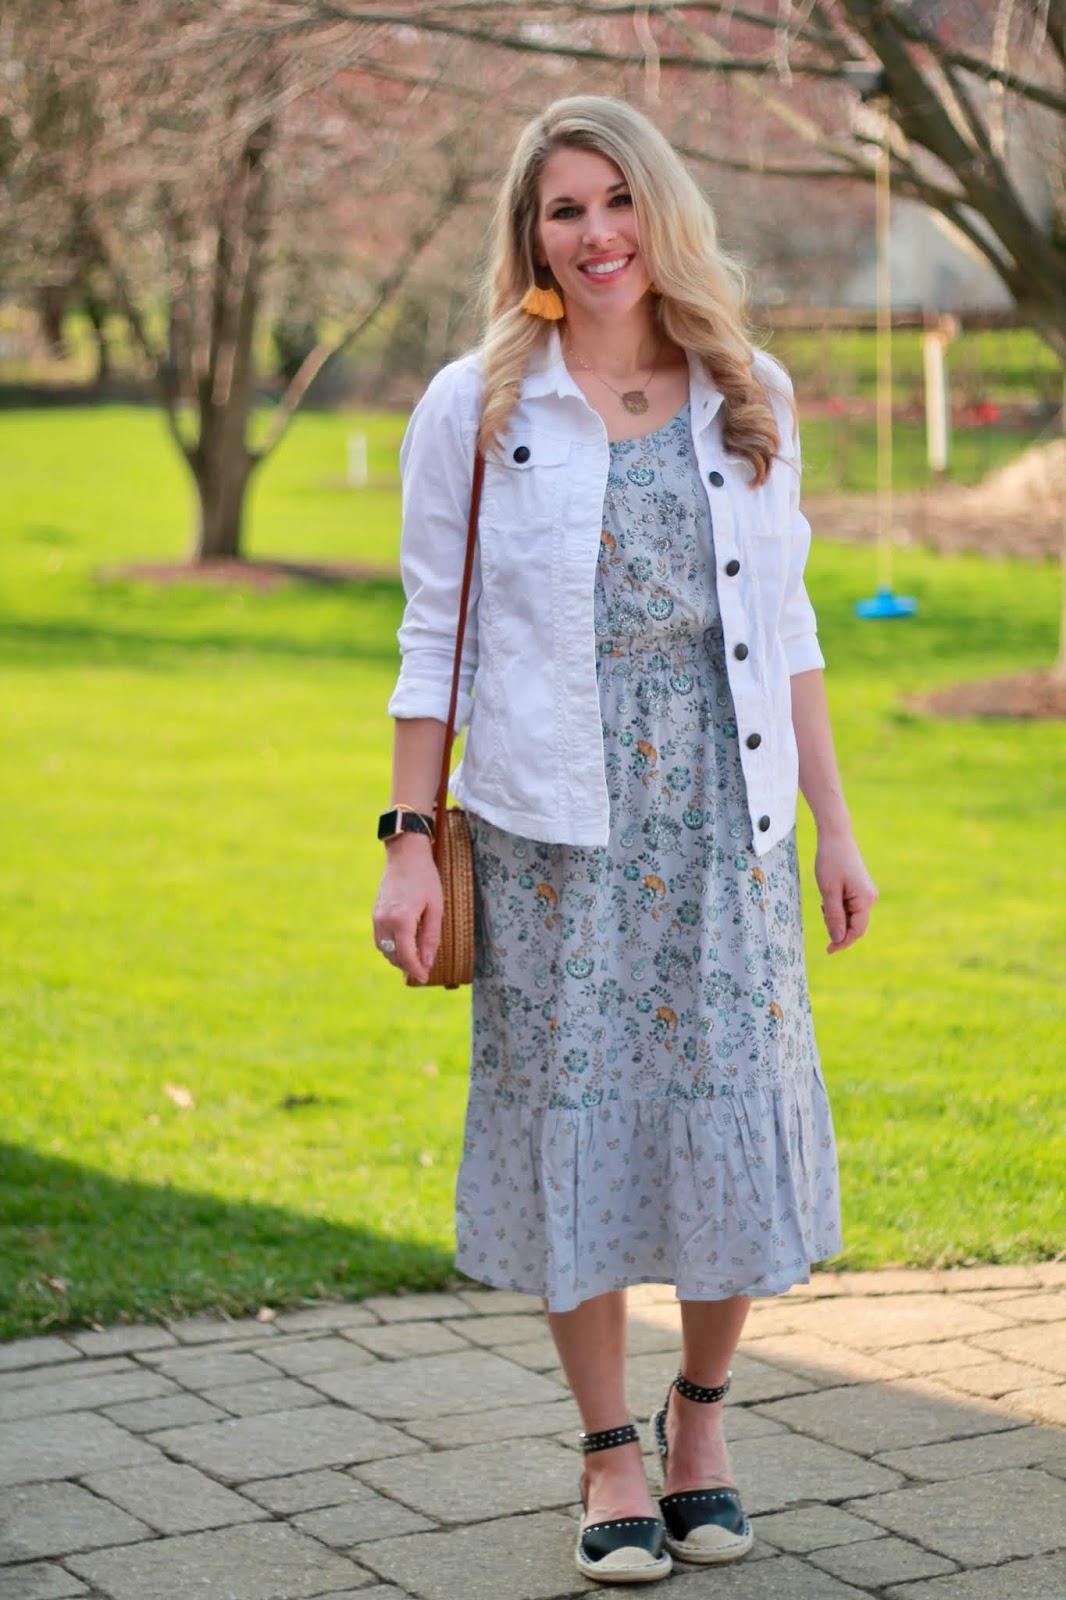 Spring Layering & Confident Twosday Linkup - I do deClaire